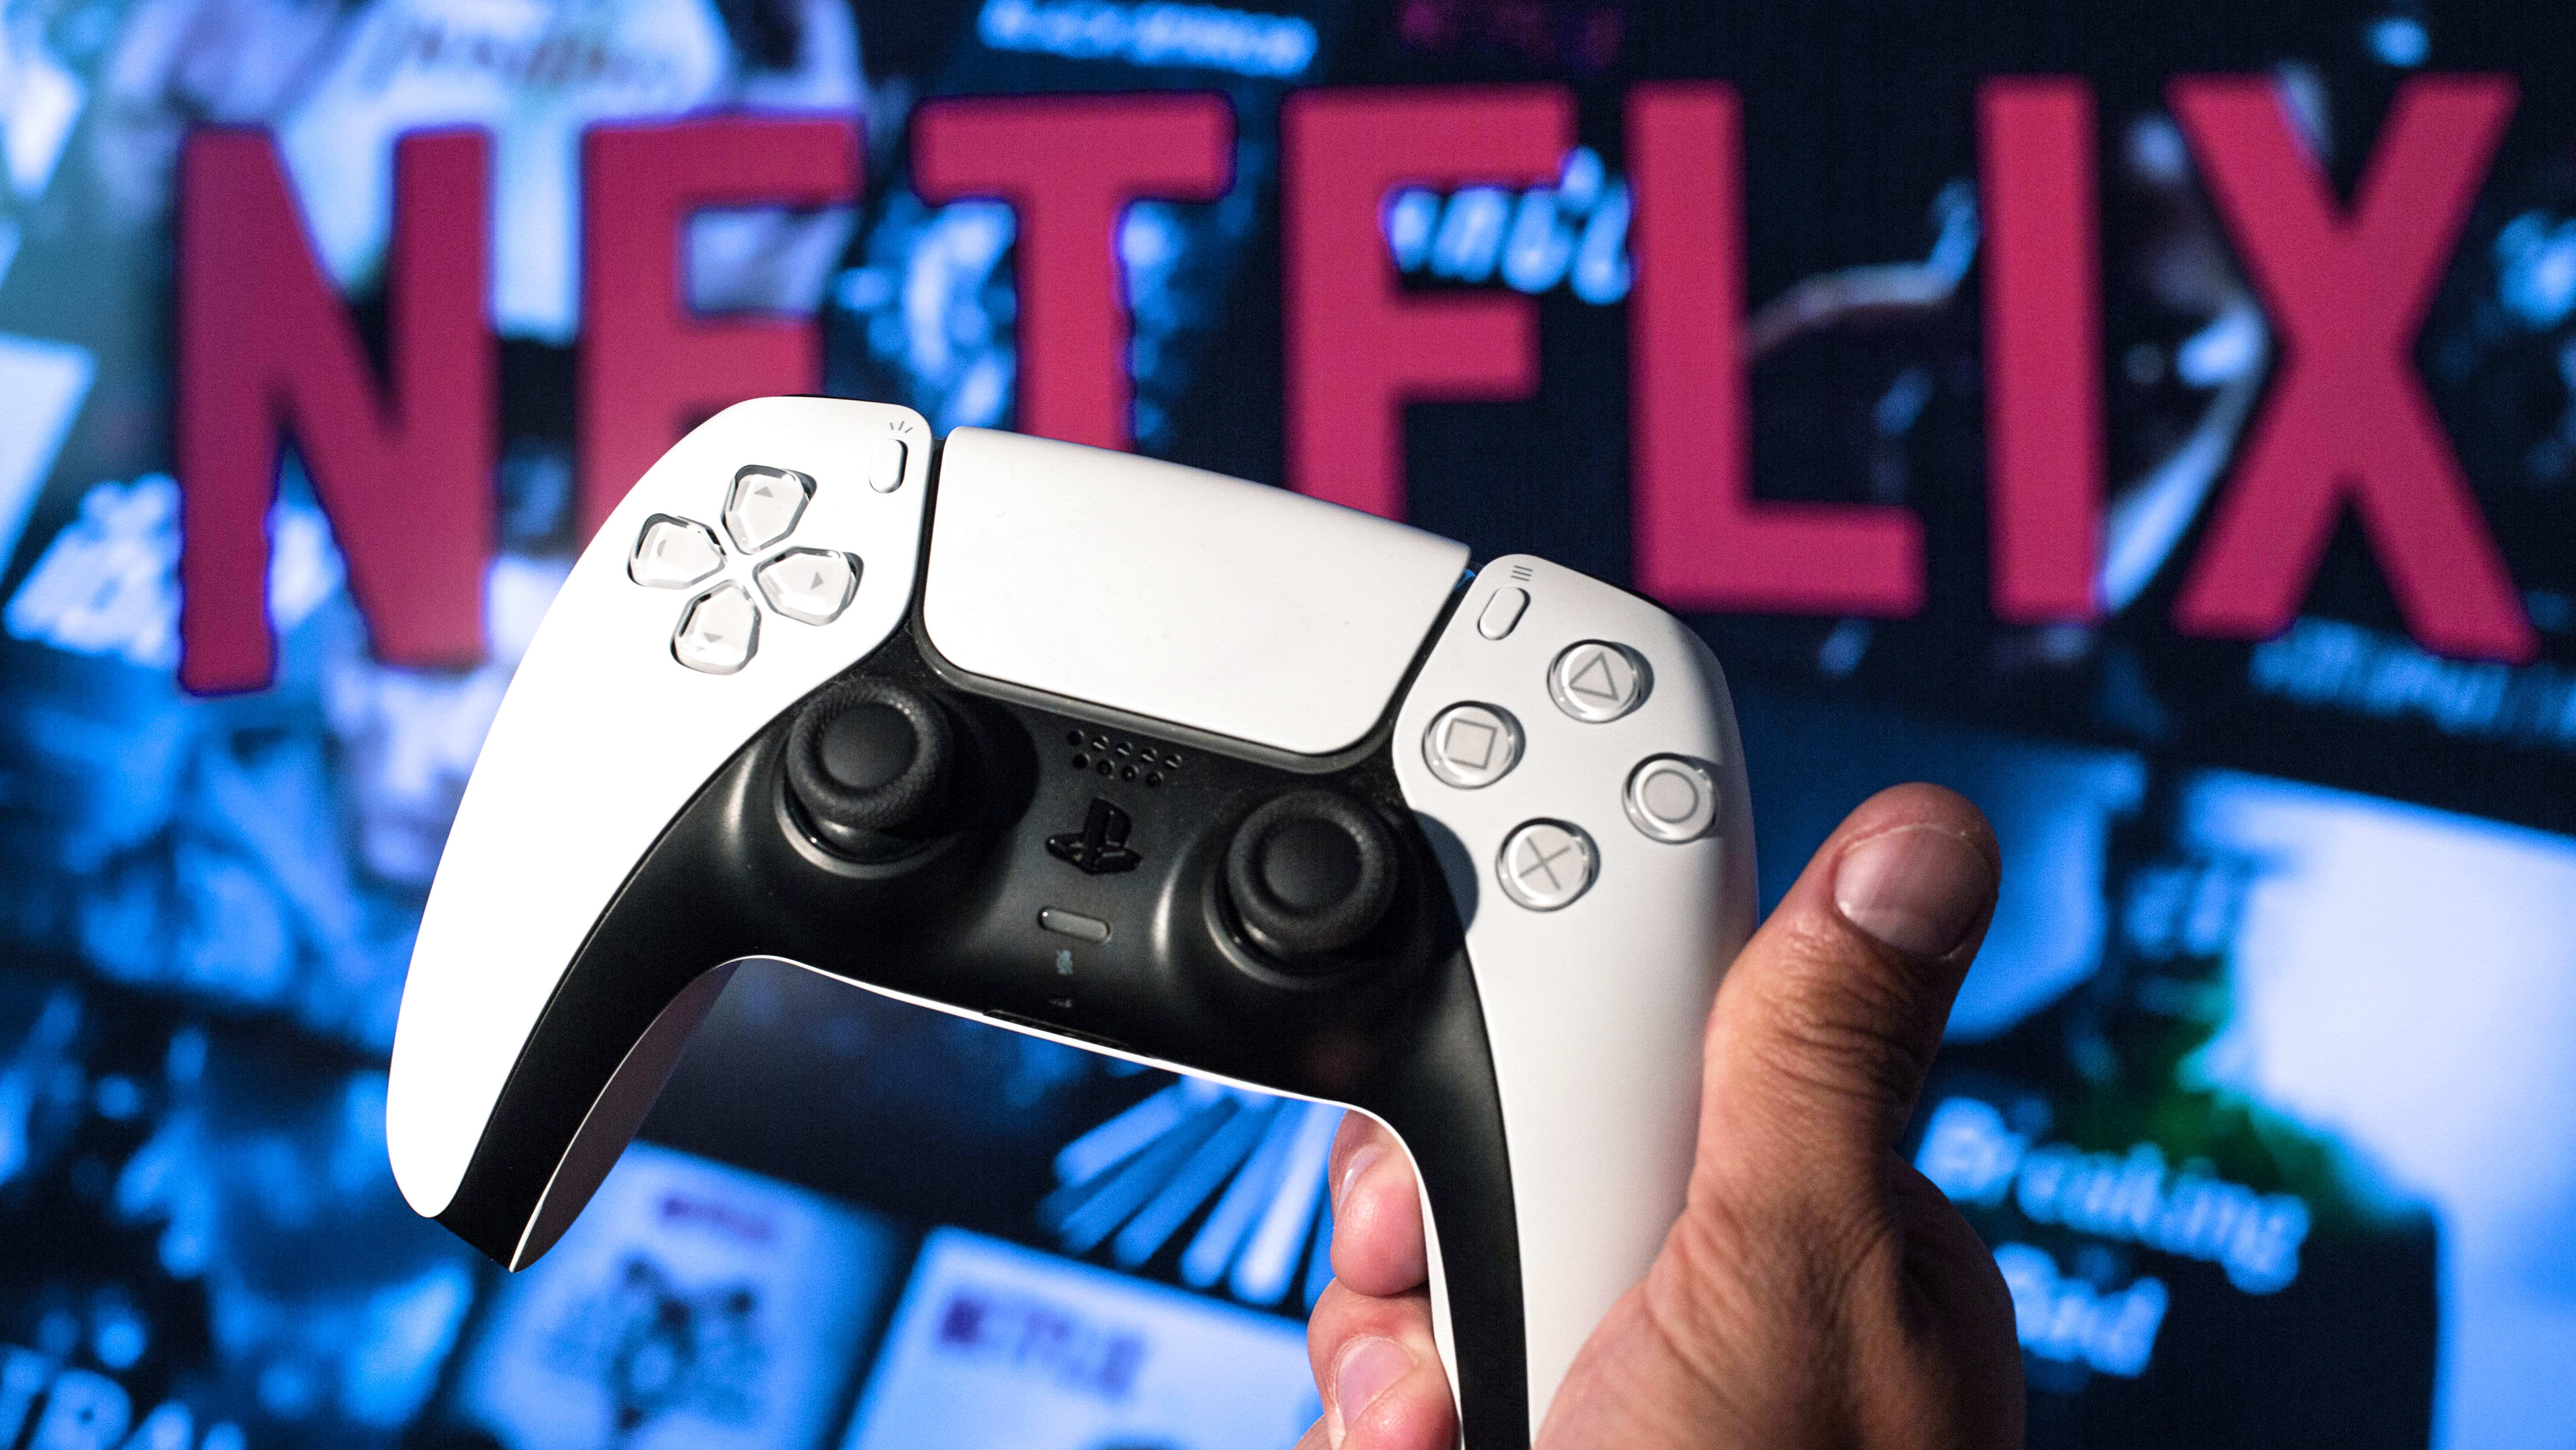 Netflix's cloud gaming service begins tests in US